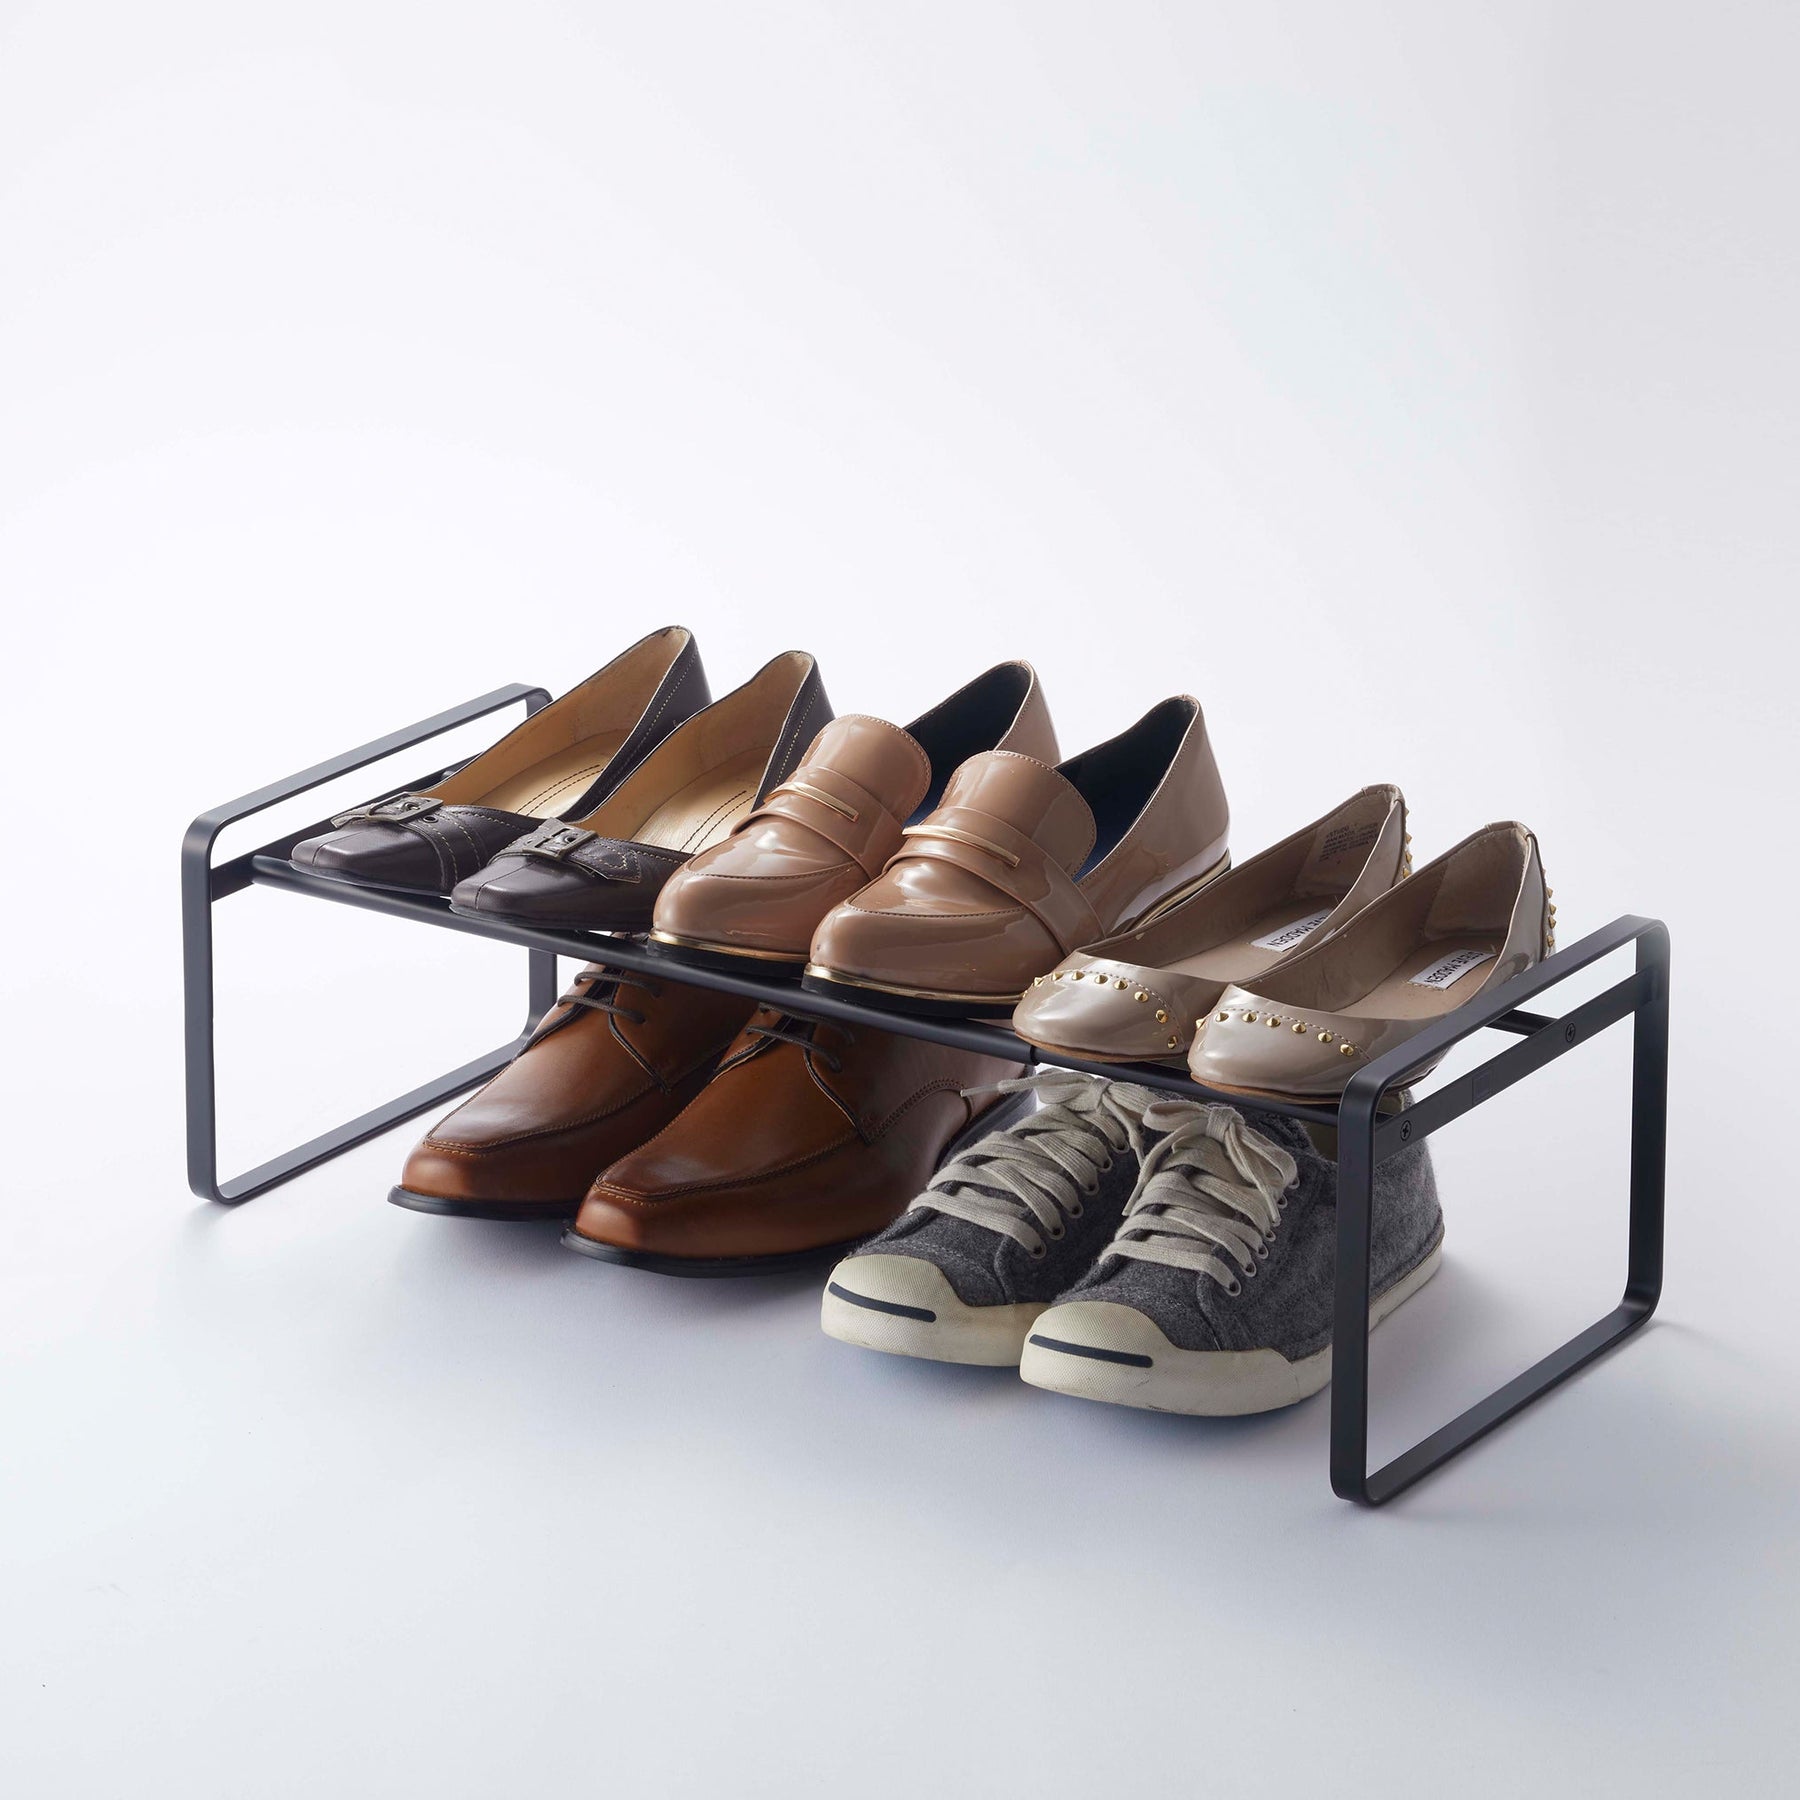 at home shoe rack